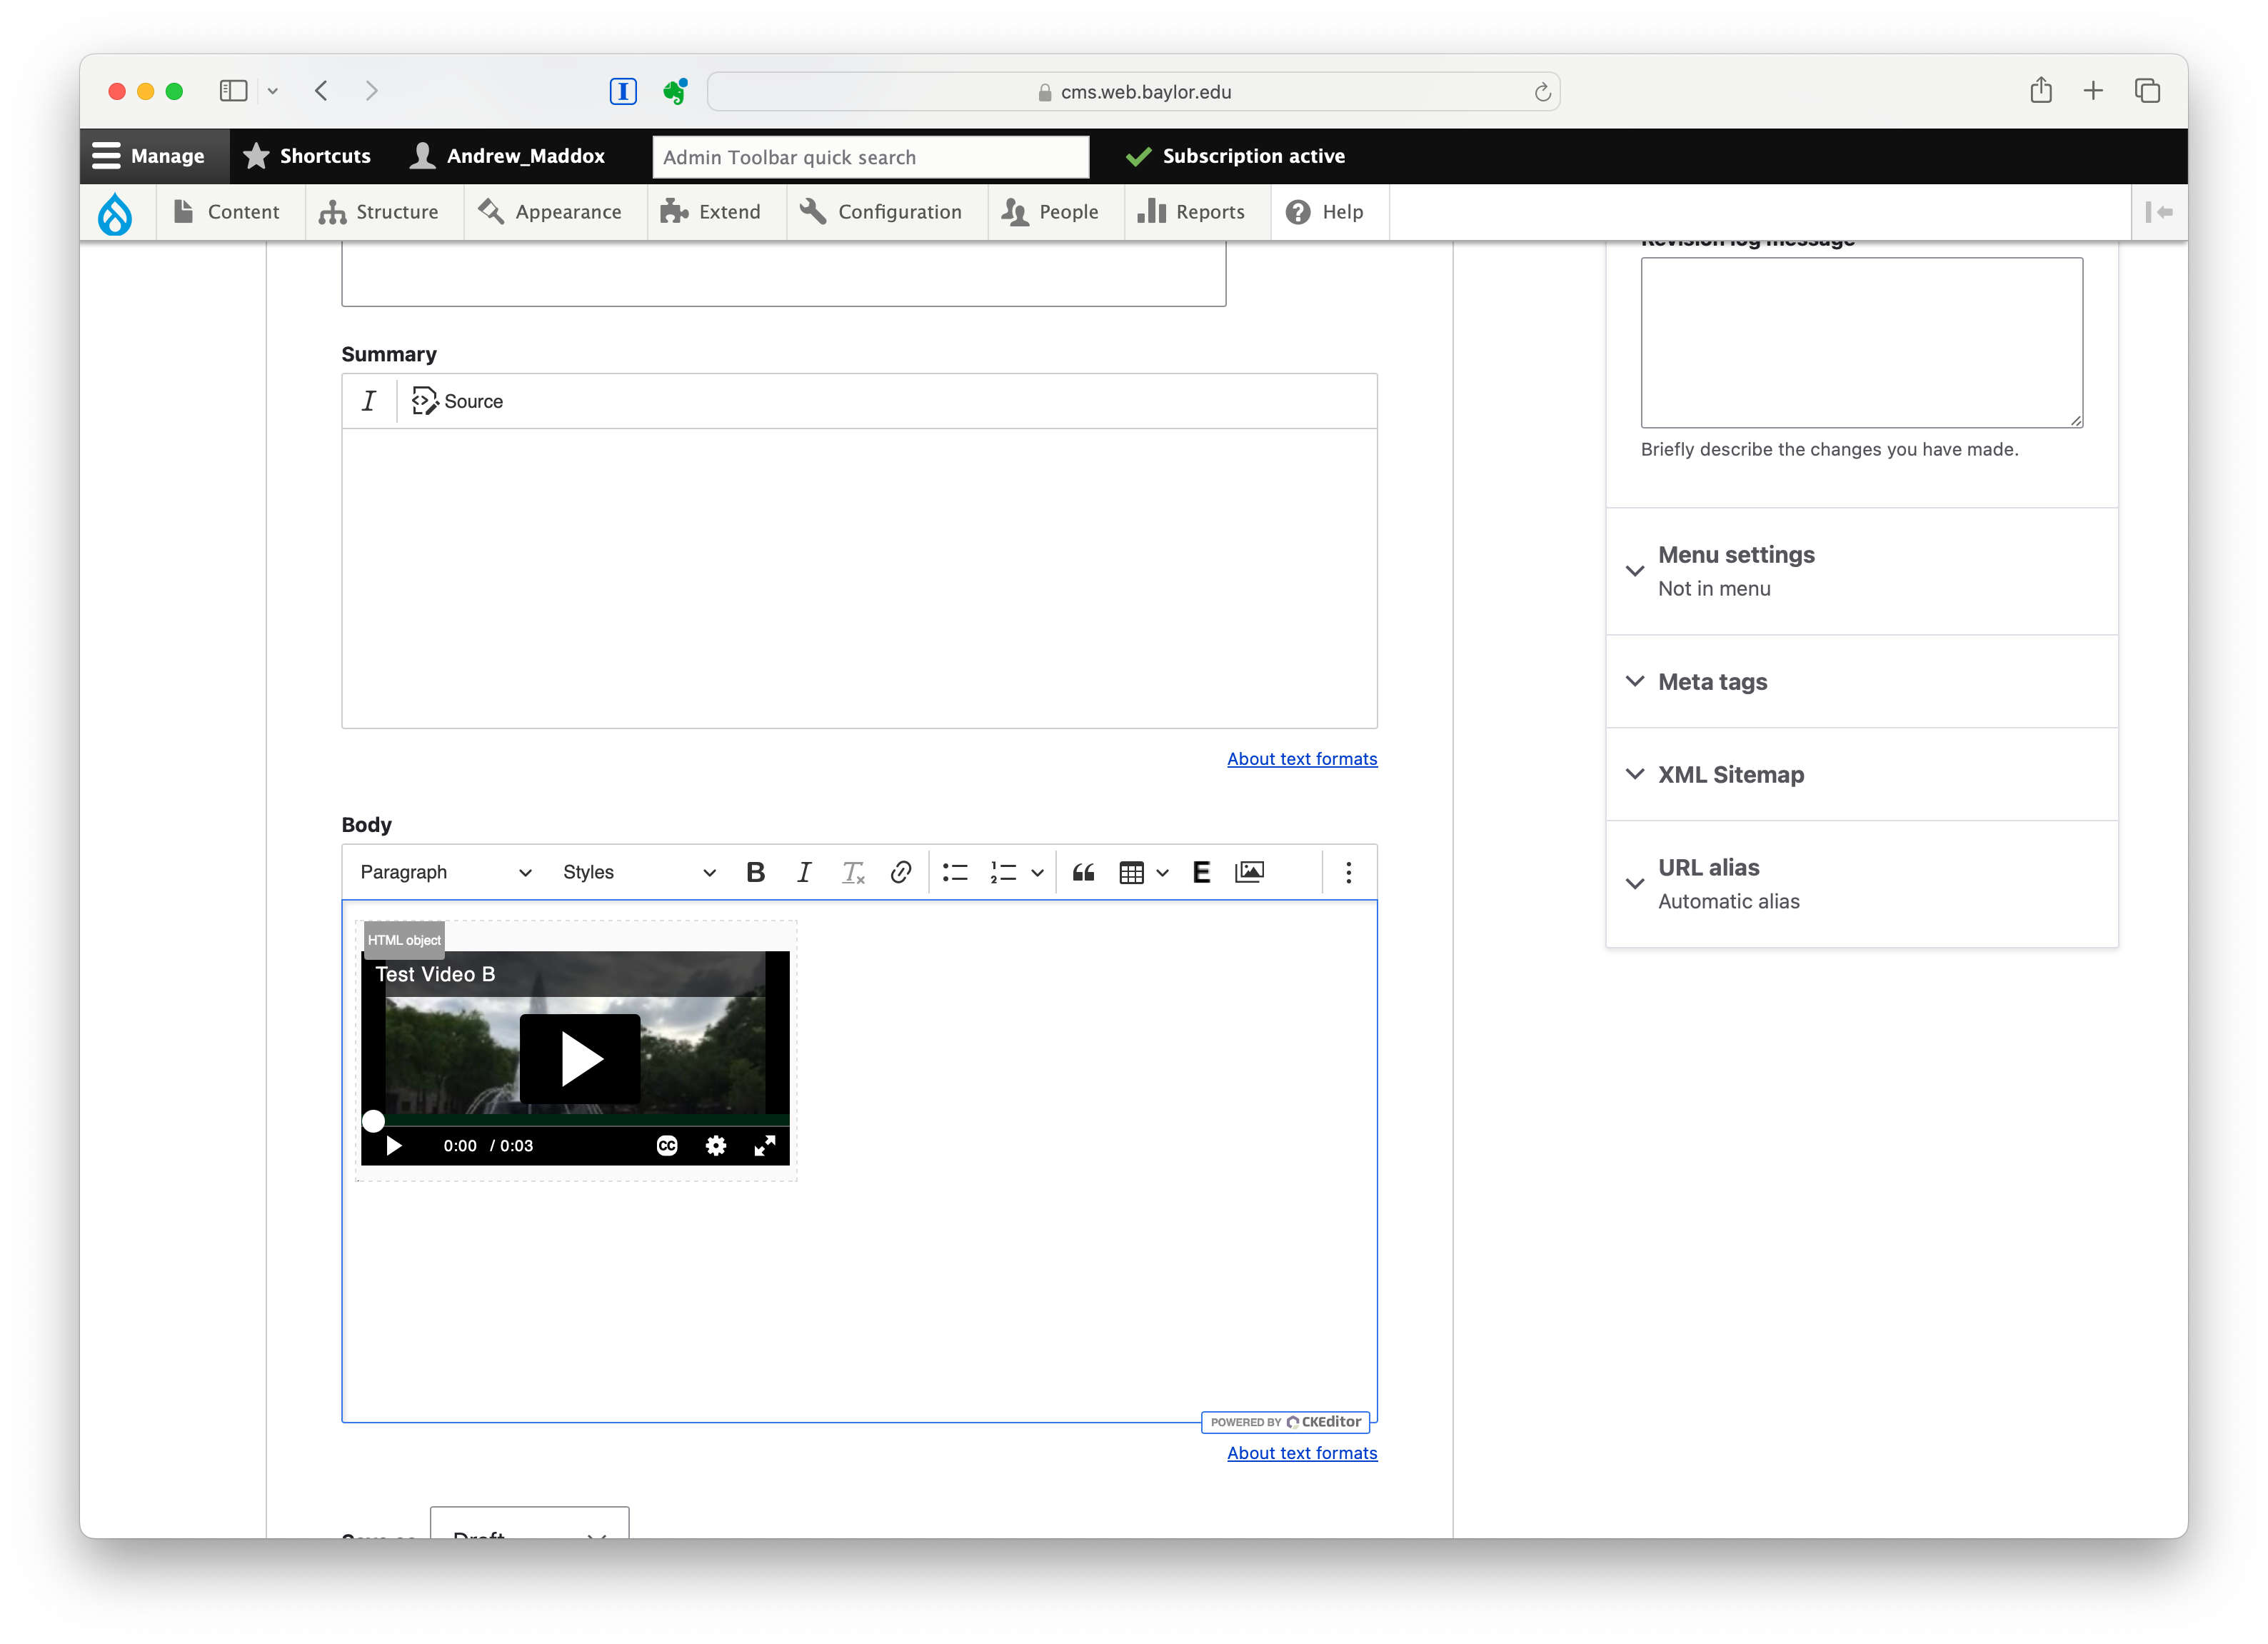 Video Embeds: Screen capture of video preview in the Body field